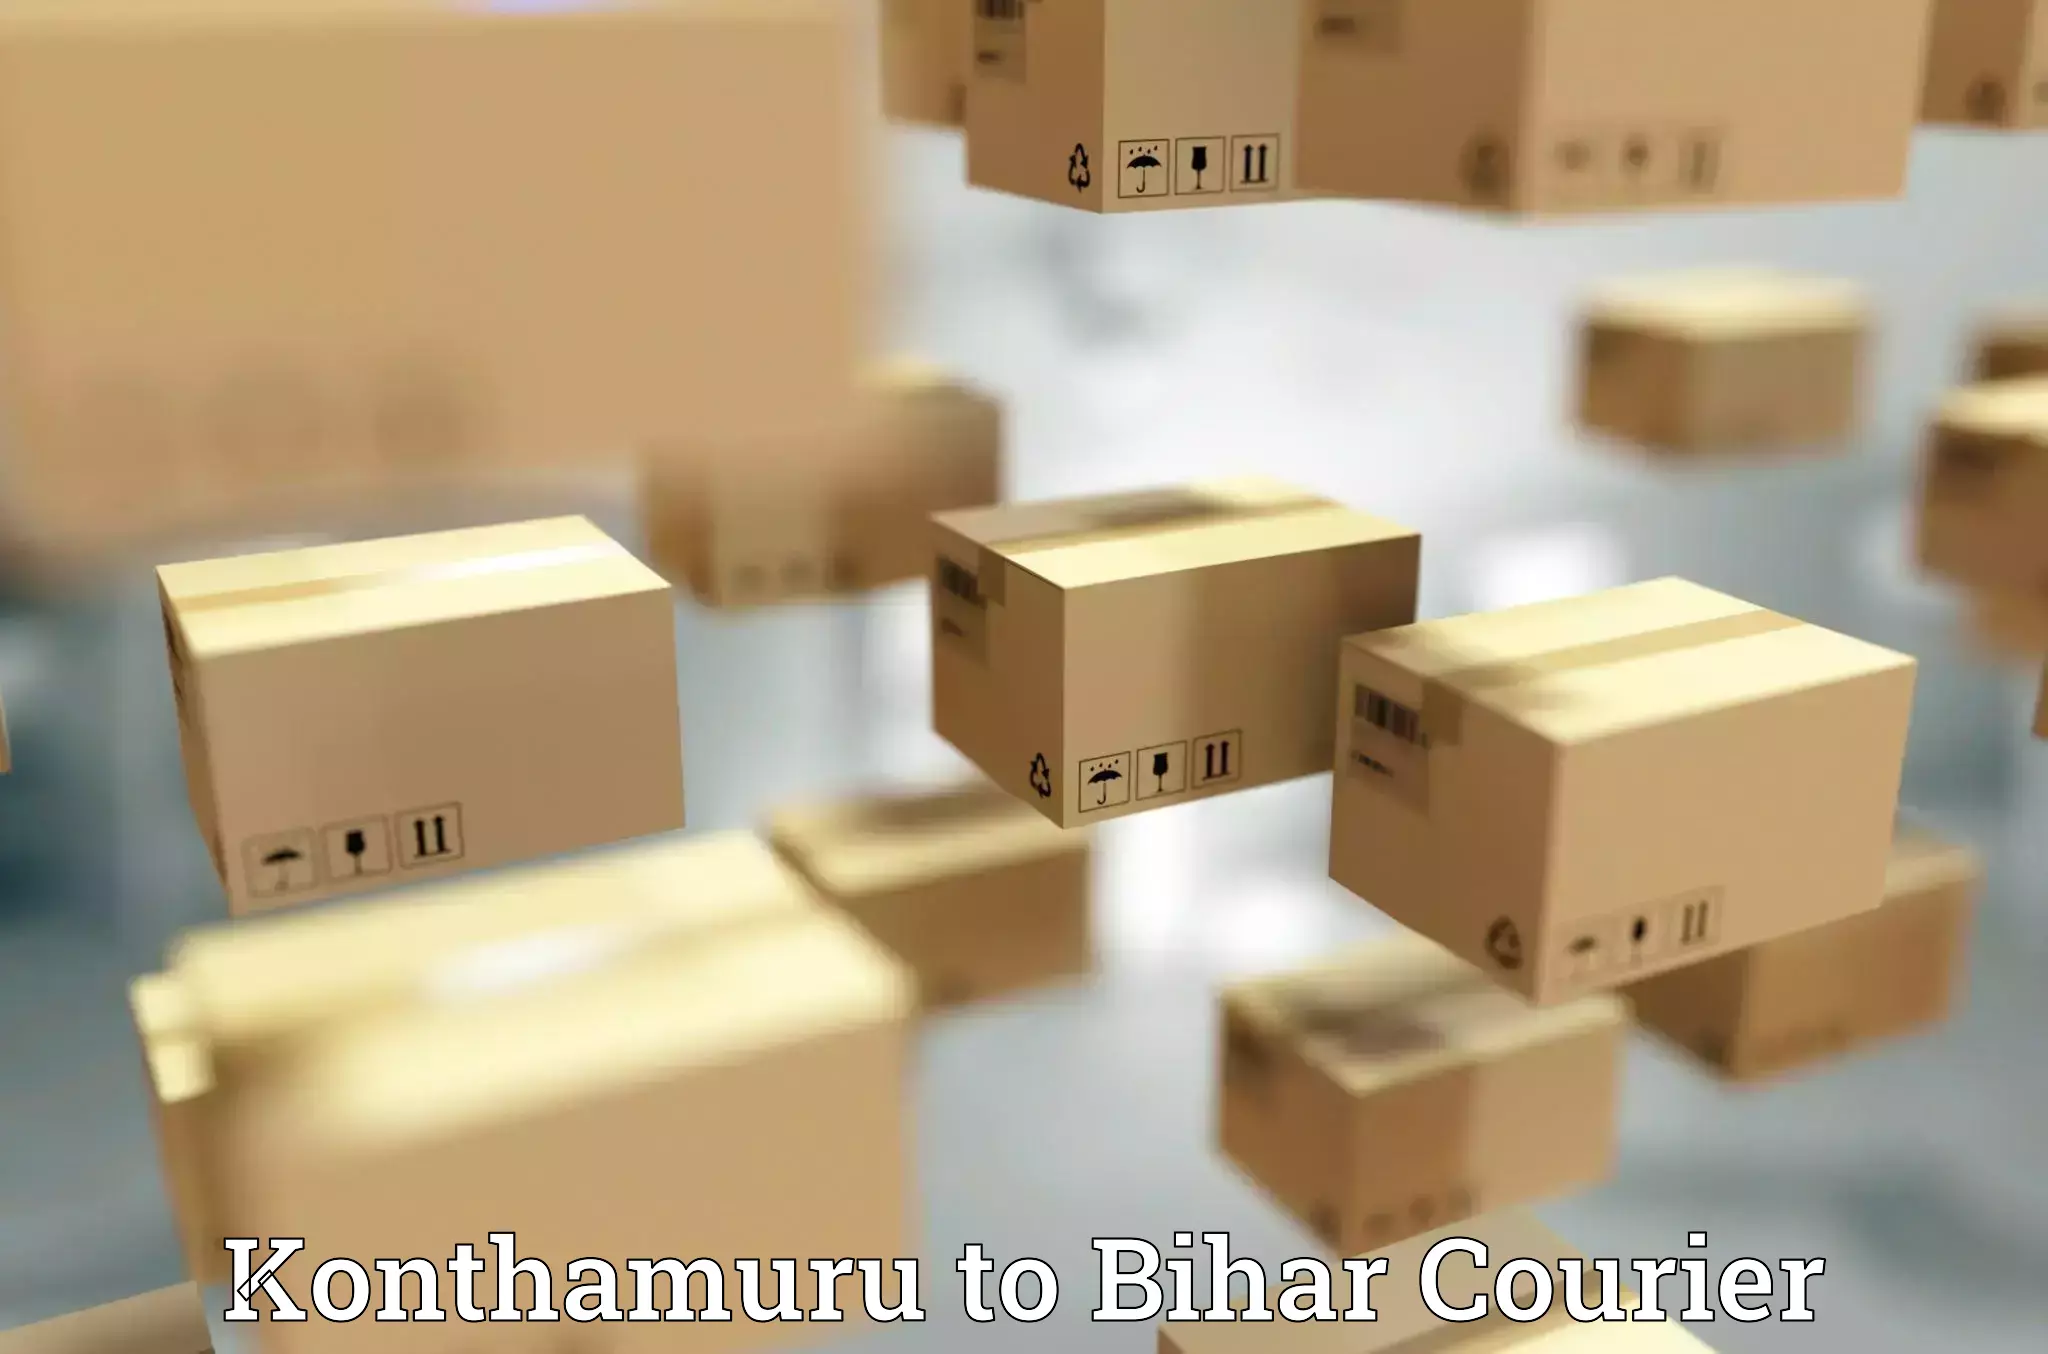 State-of-the-art courier technology Konthamuru to Chainpur